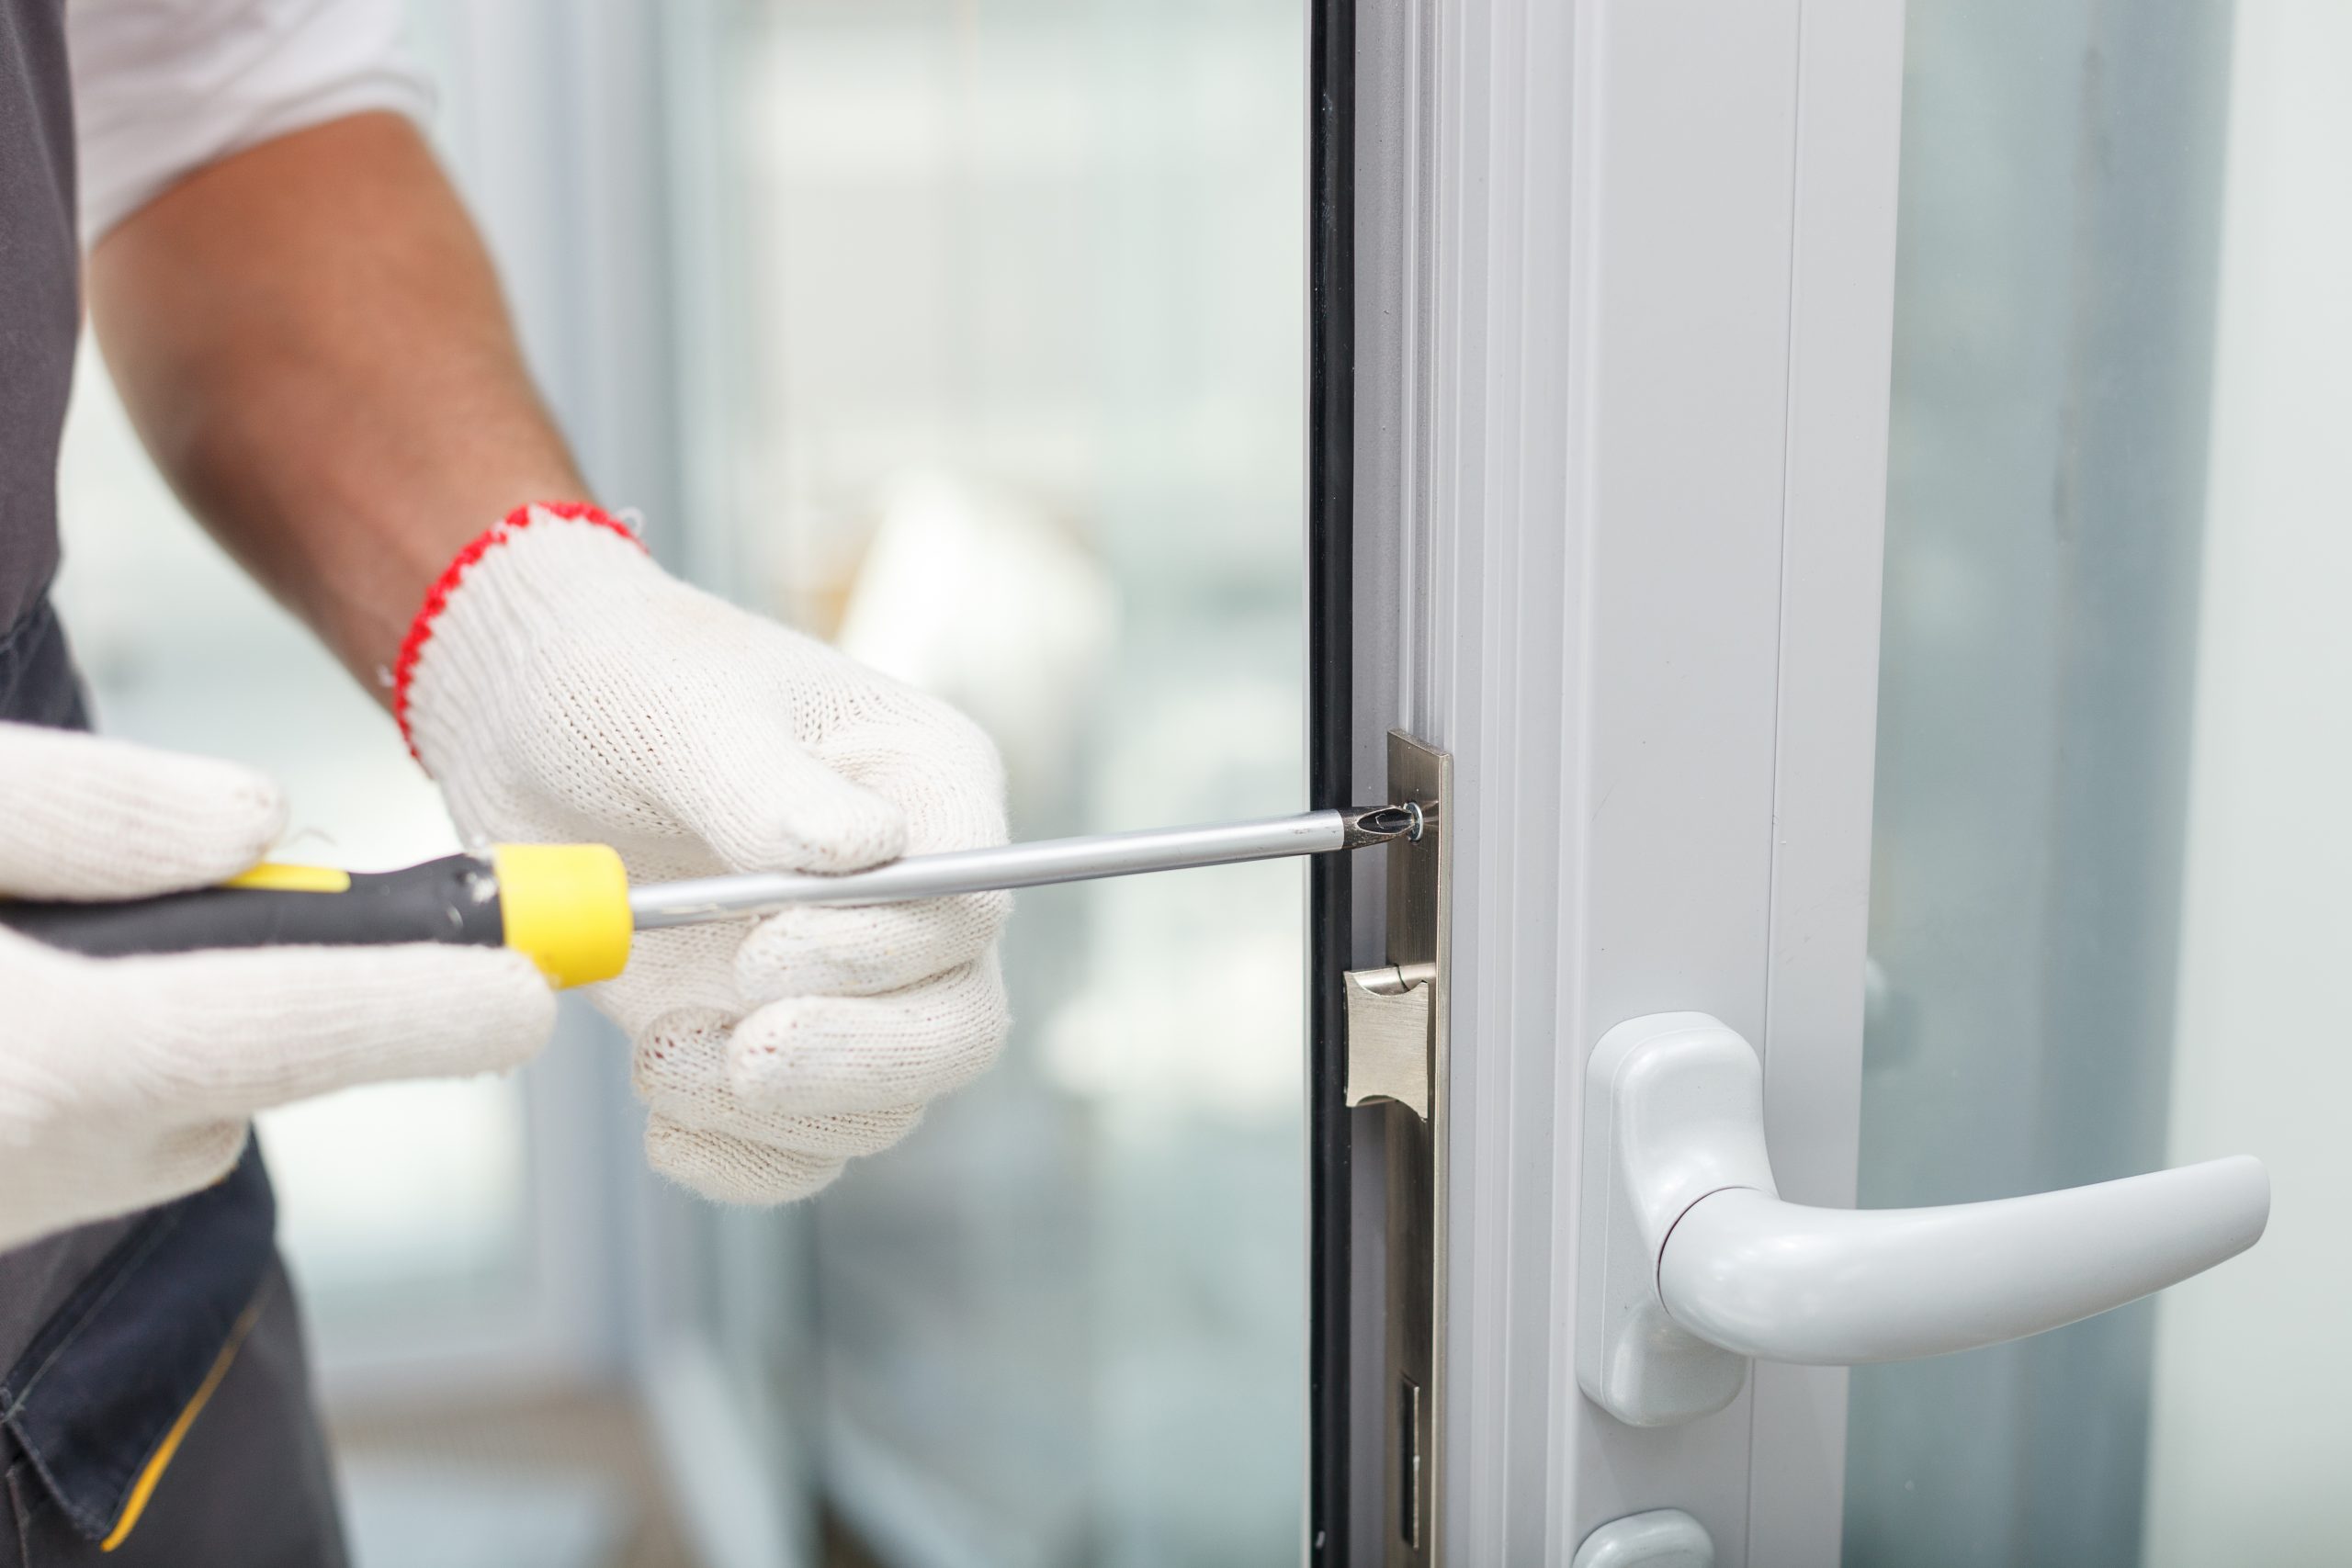 double glazing repair costs mere